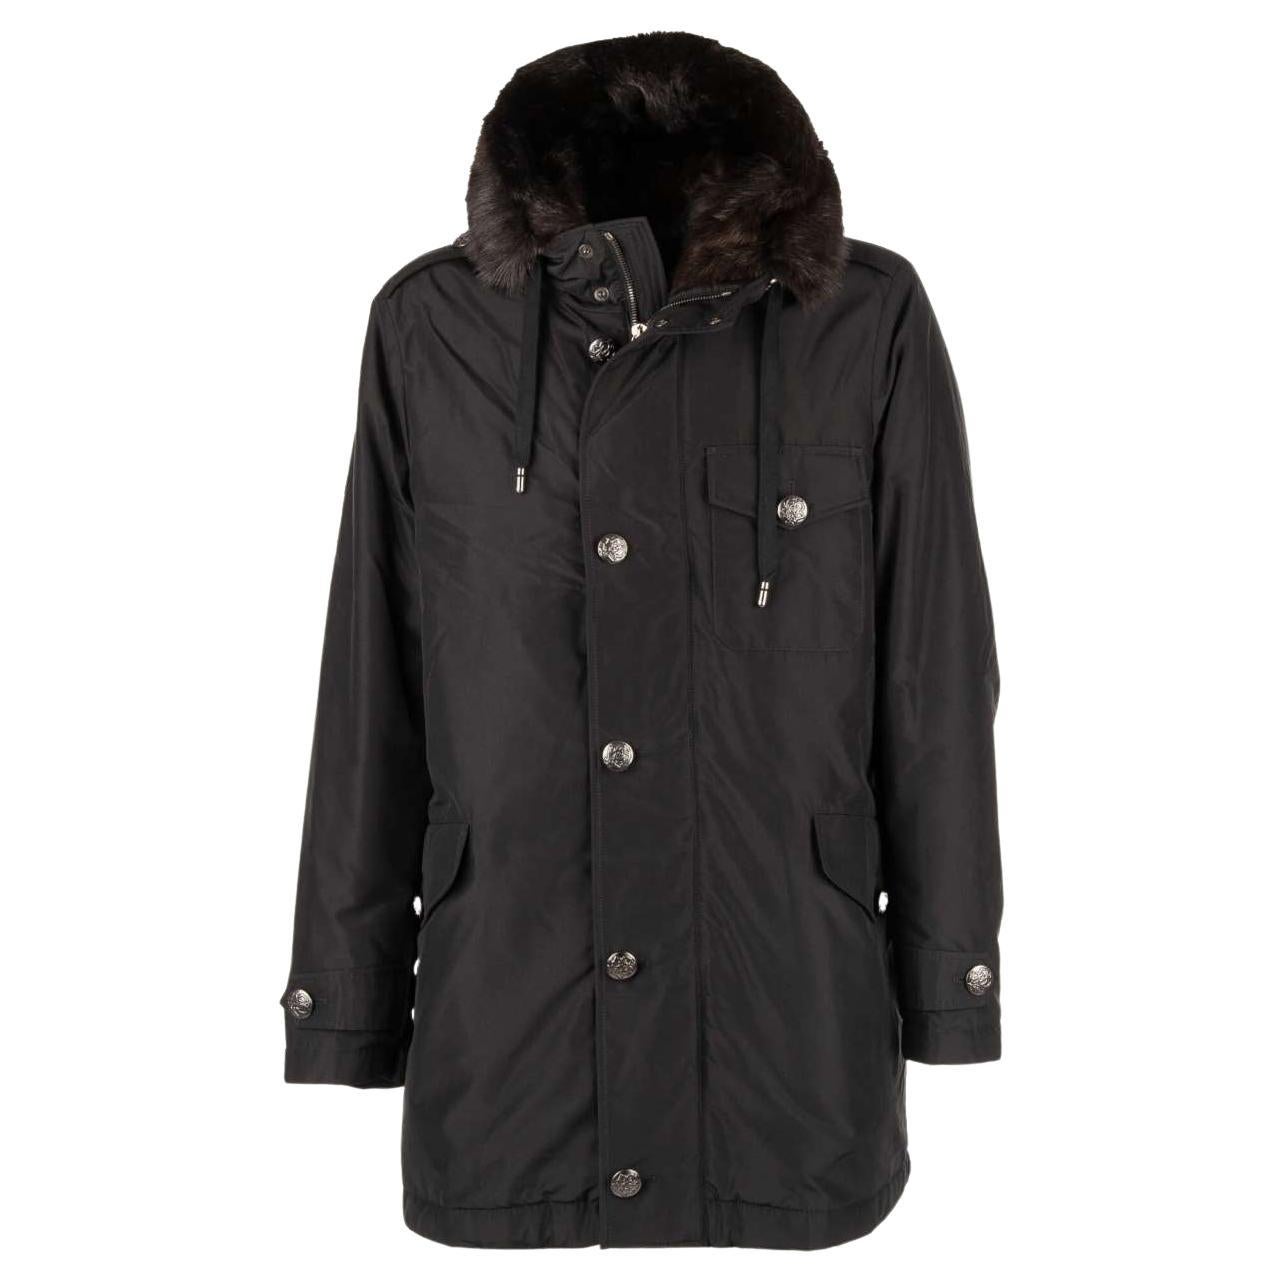 Dolce & Gabbana Silk Parka Jacket with Detachable Fur Lining and Hoody Black 54 For Sale